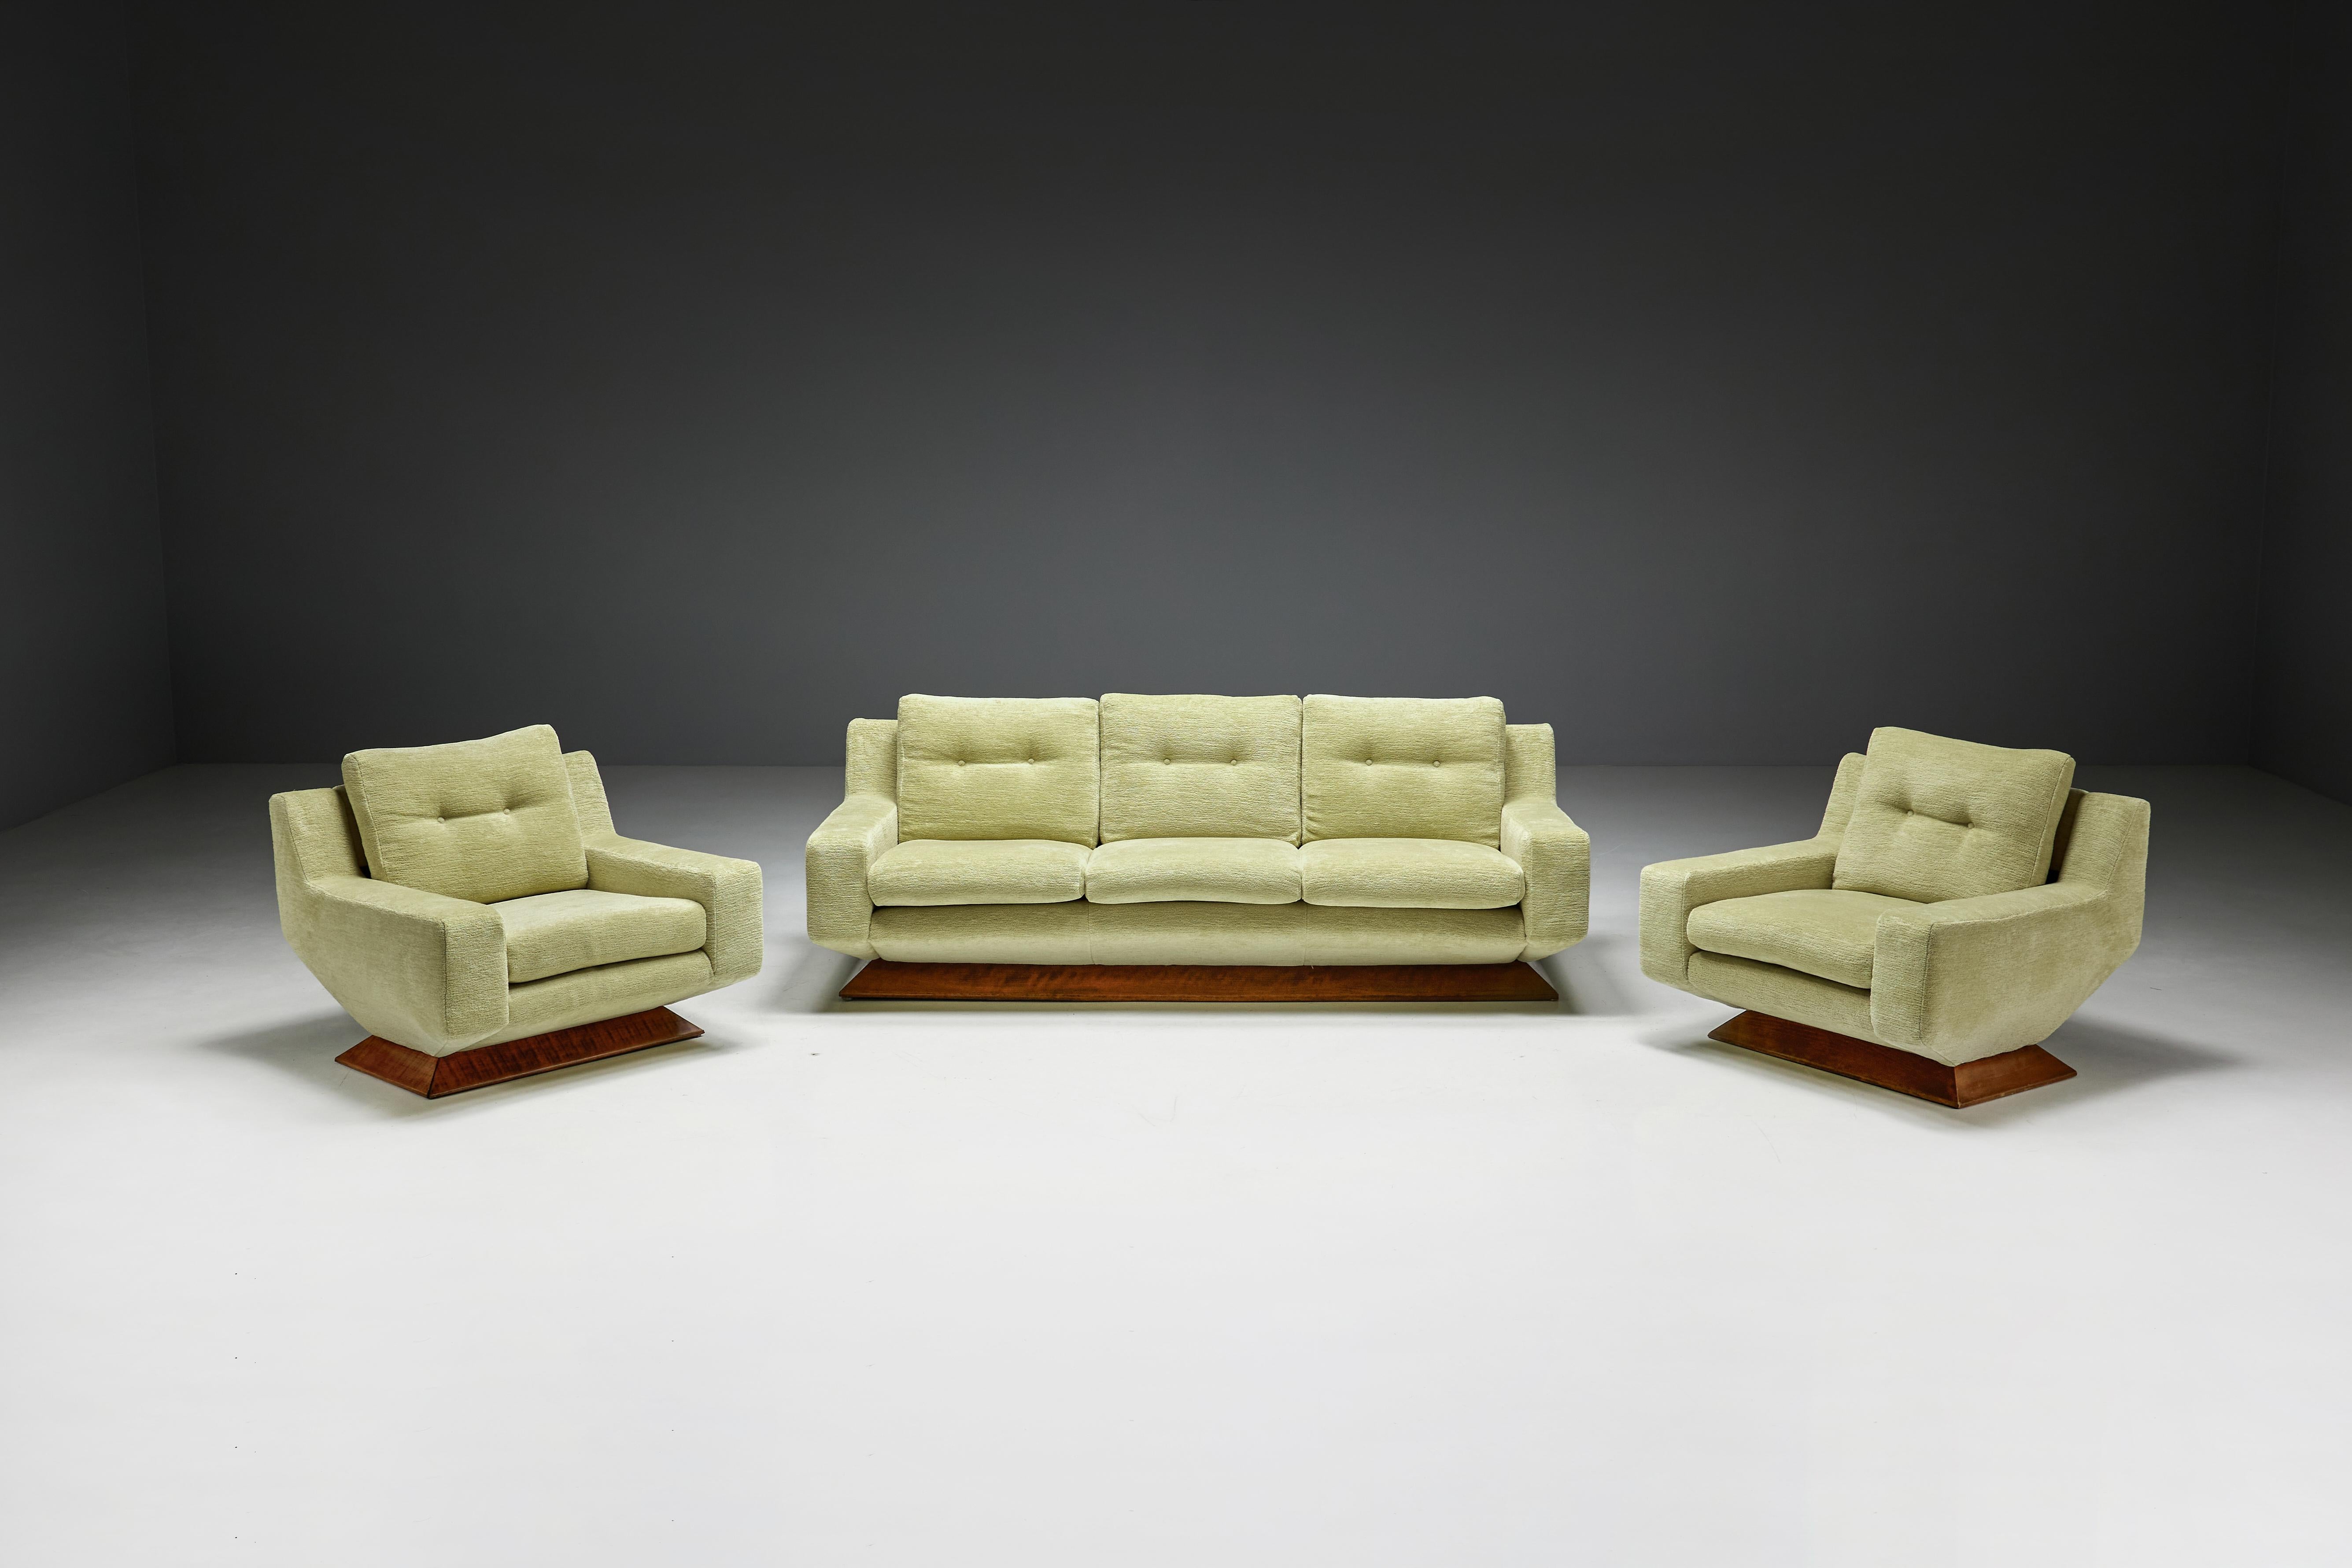 Mid-Century Club Chairs in Pierre Frey Chenille, Italy, 1960s For Sale 5